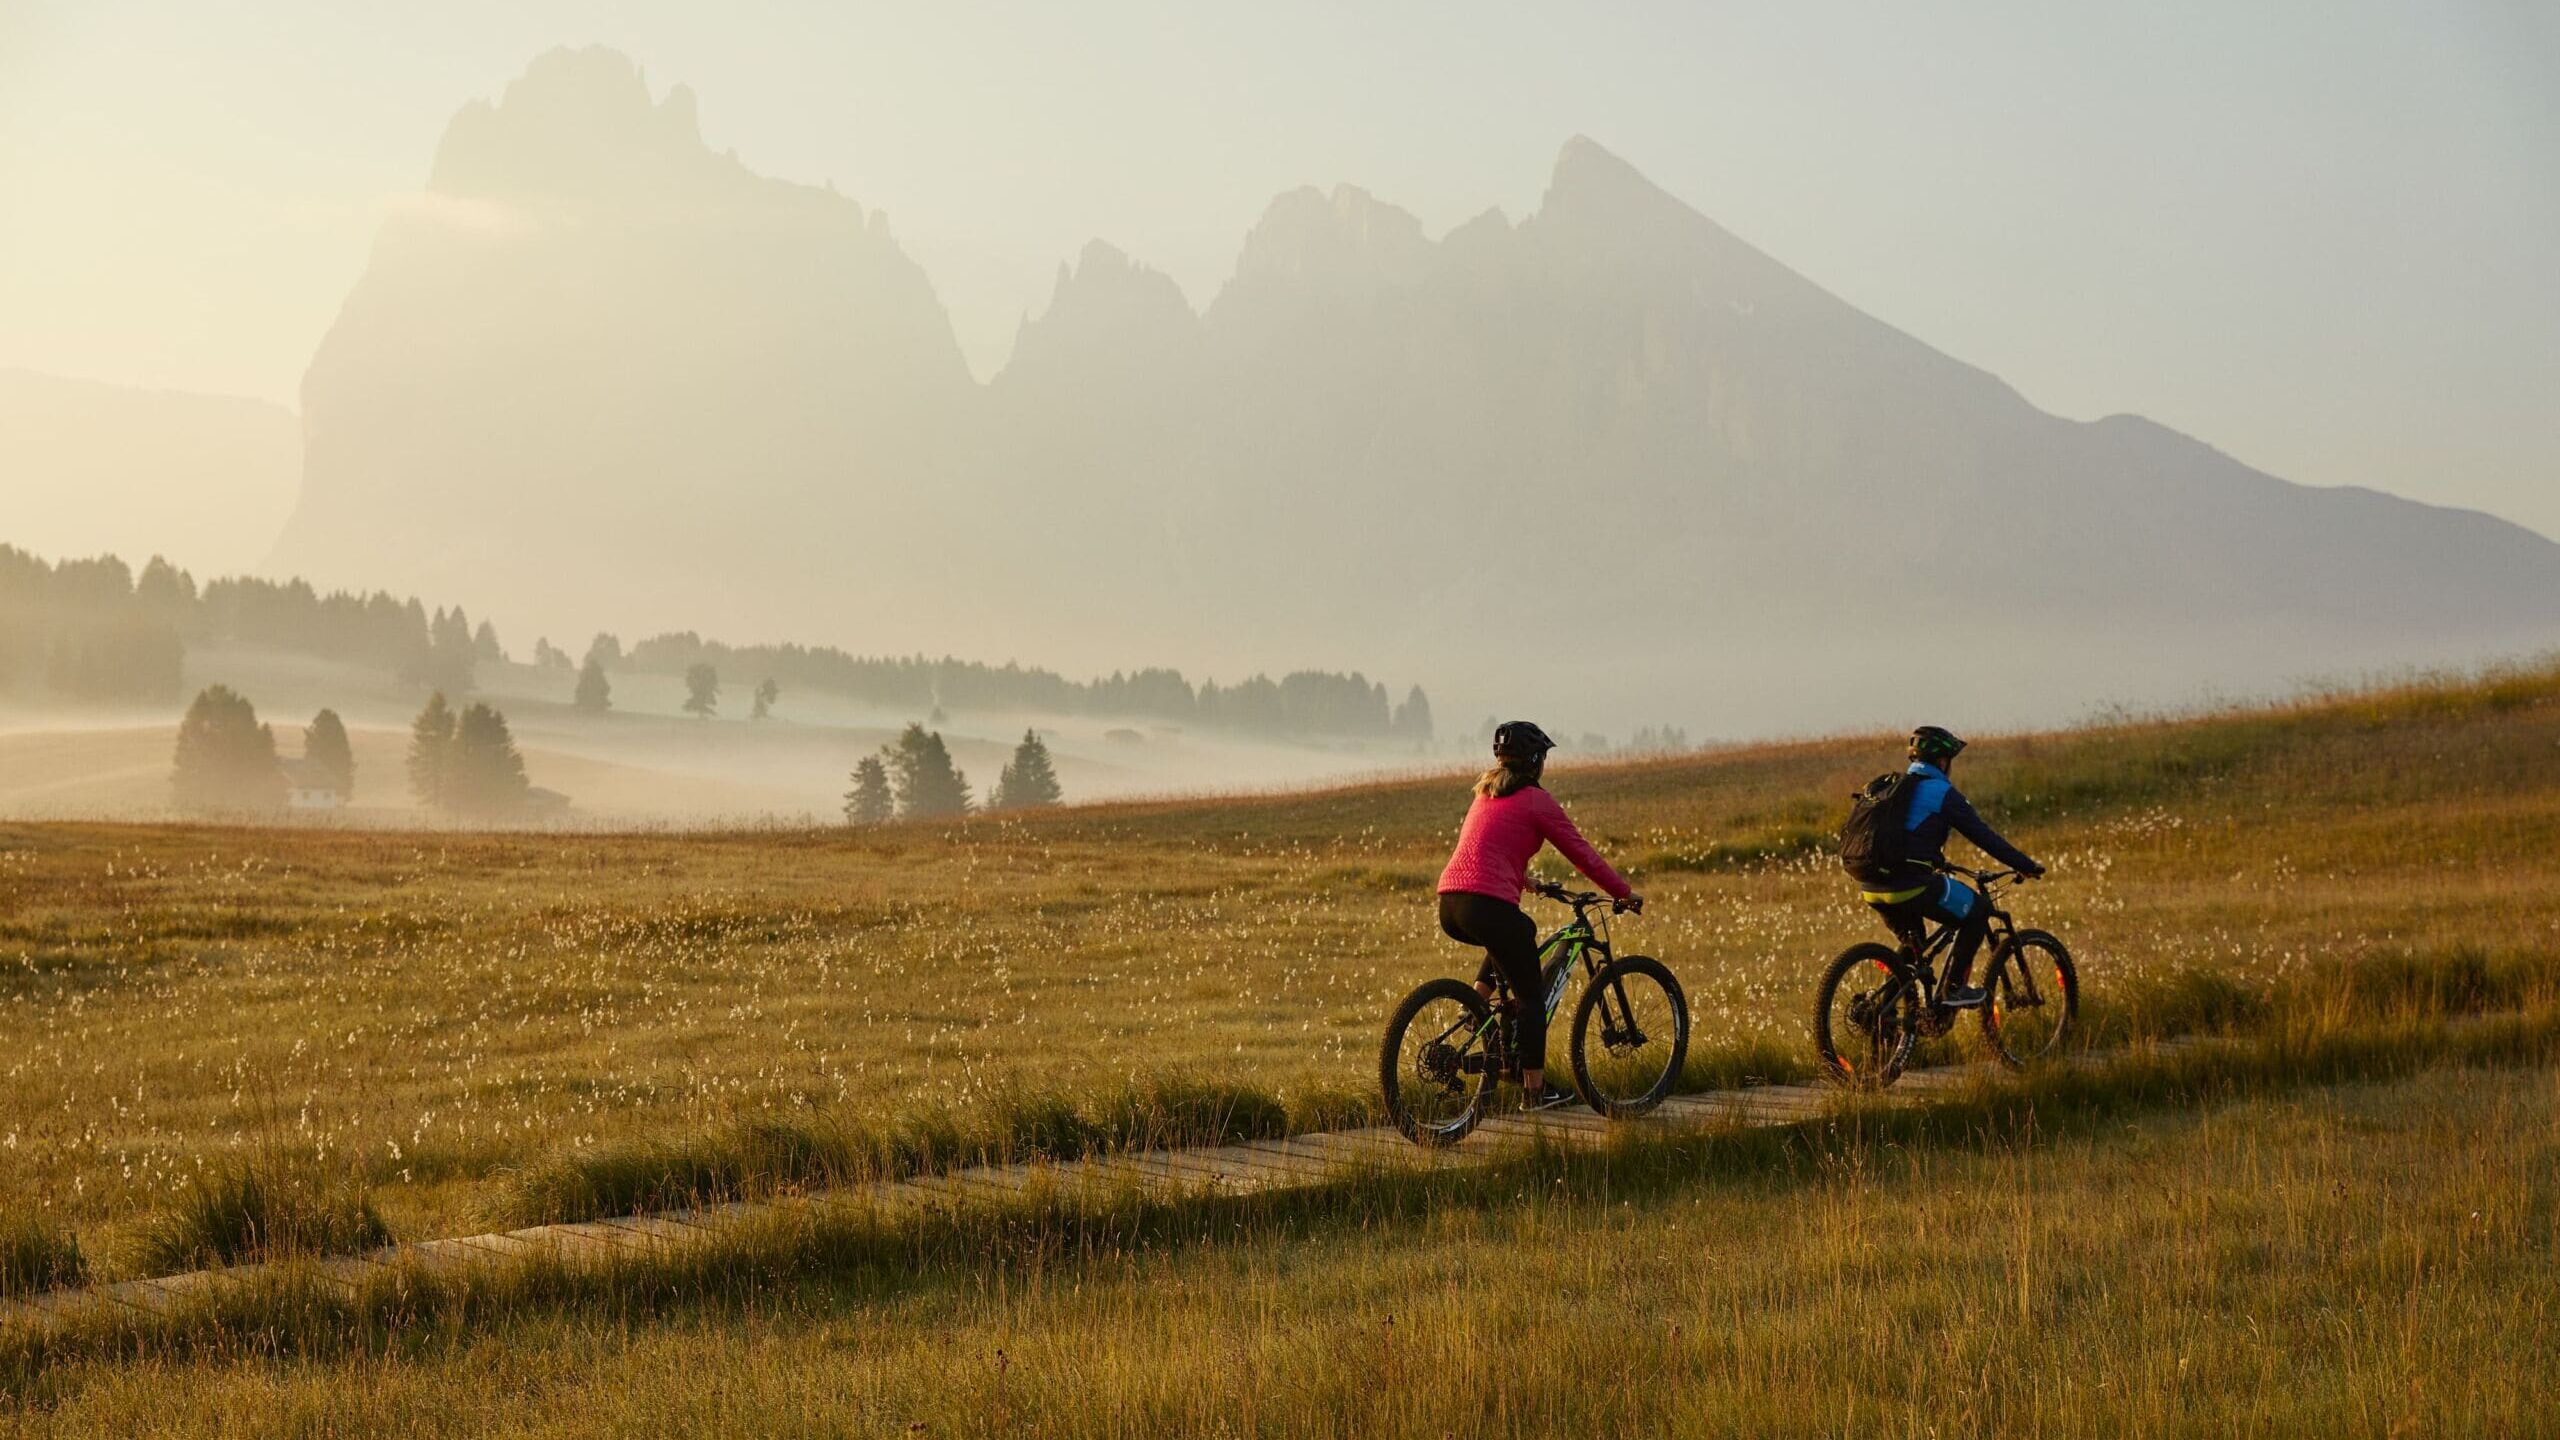 Mountain bike tour on the Alpe di Siusi with the Sasso Lungo group in the background